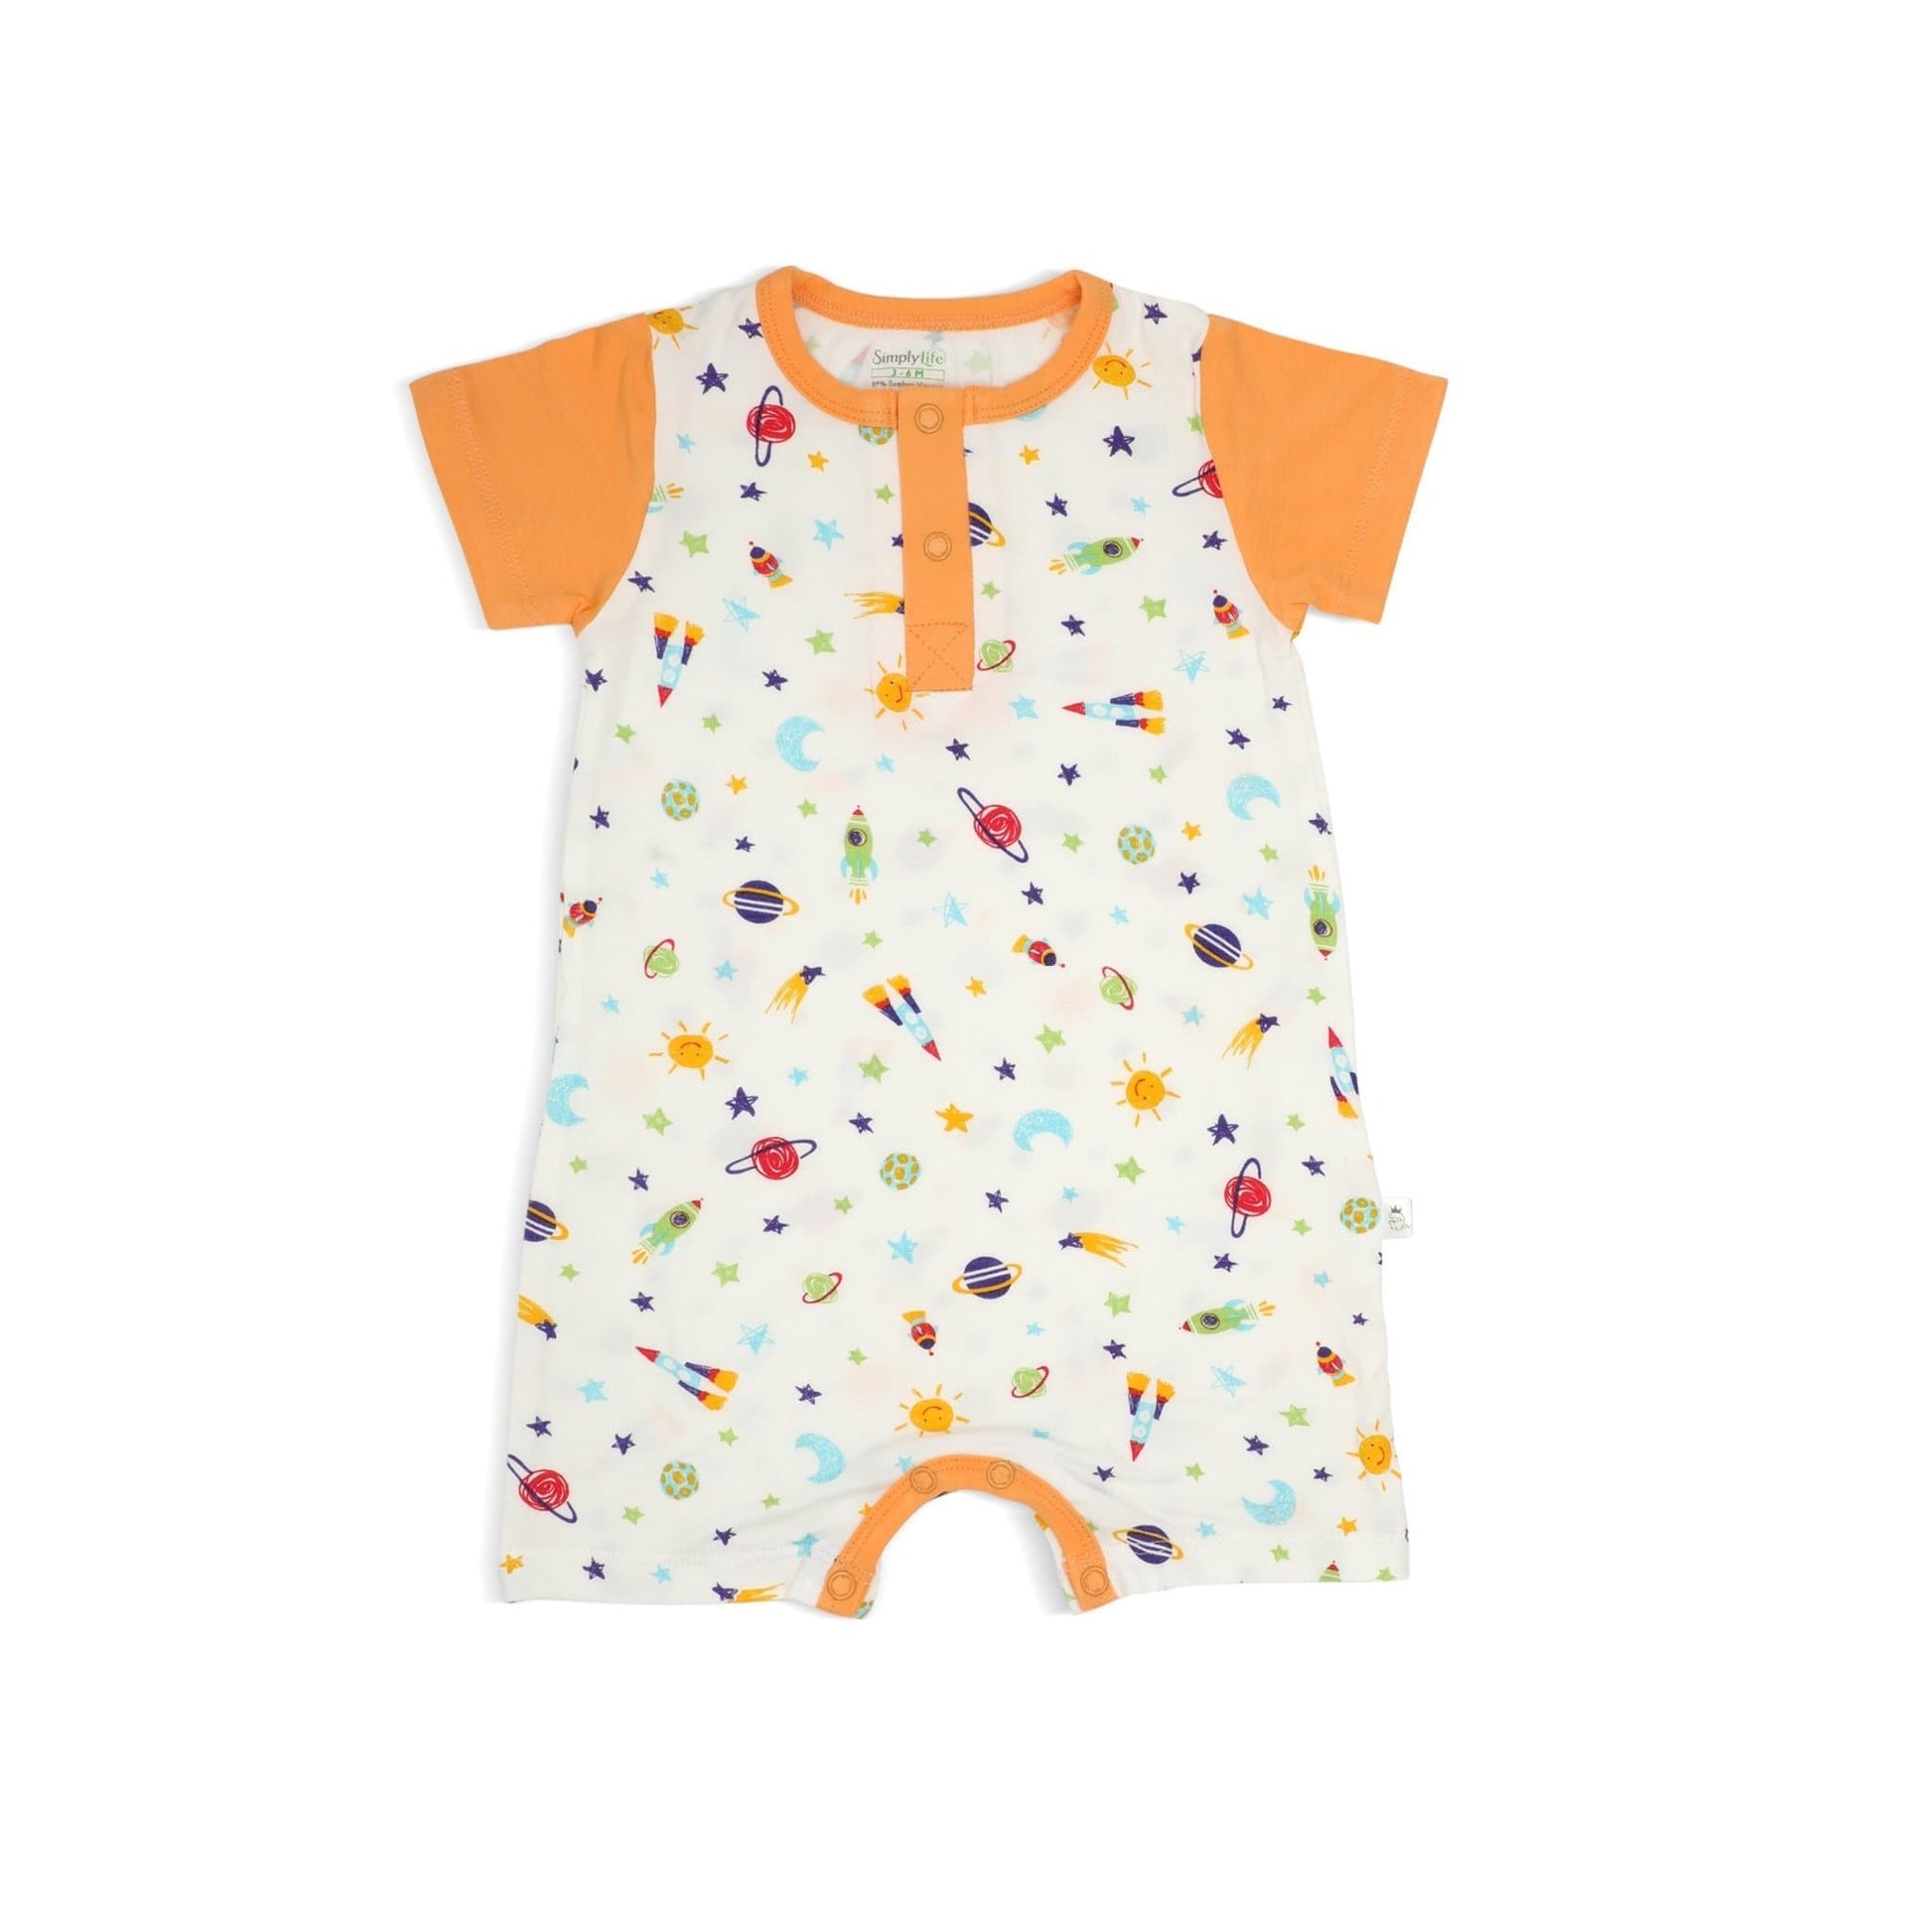 Spaceships - Short-sleeved Shortall with Front Buttons by simplylifebaby